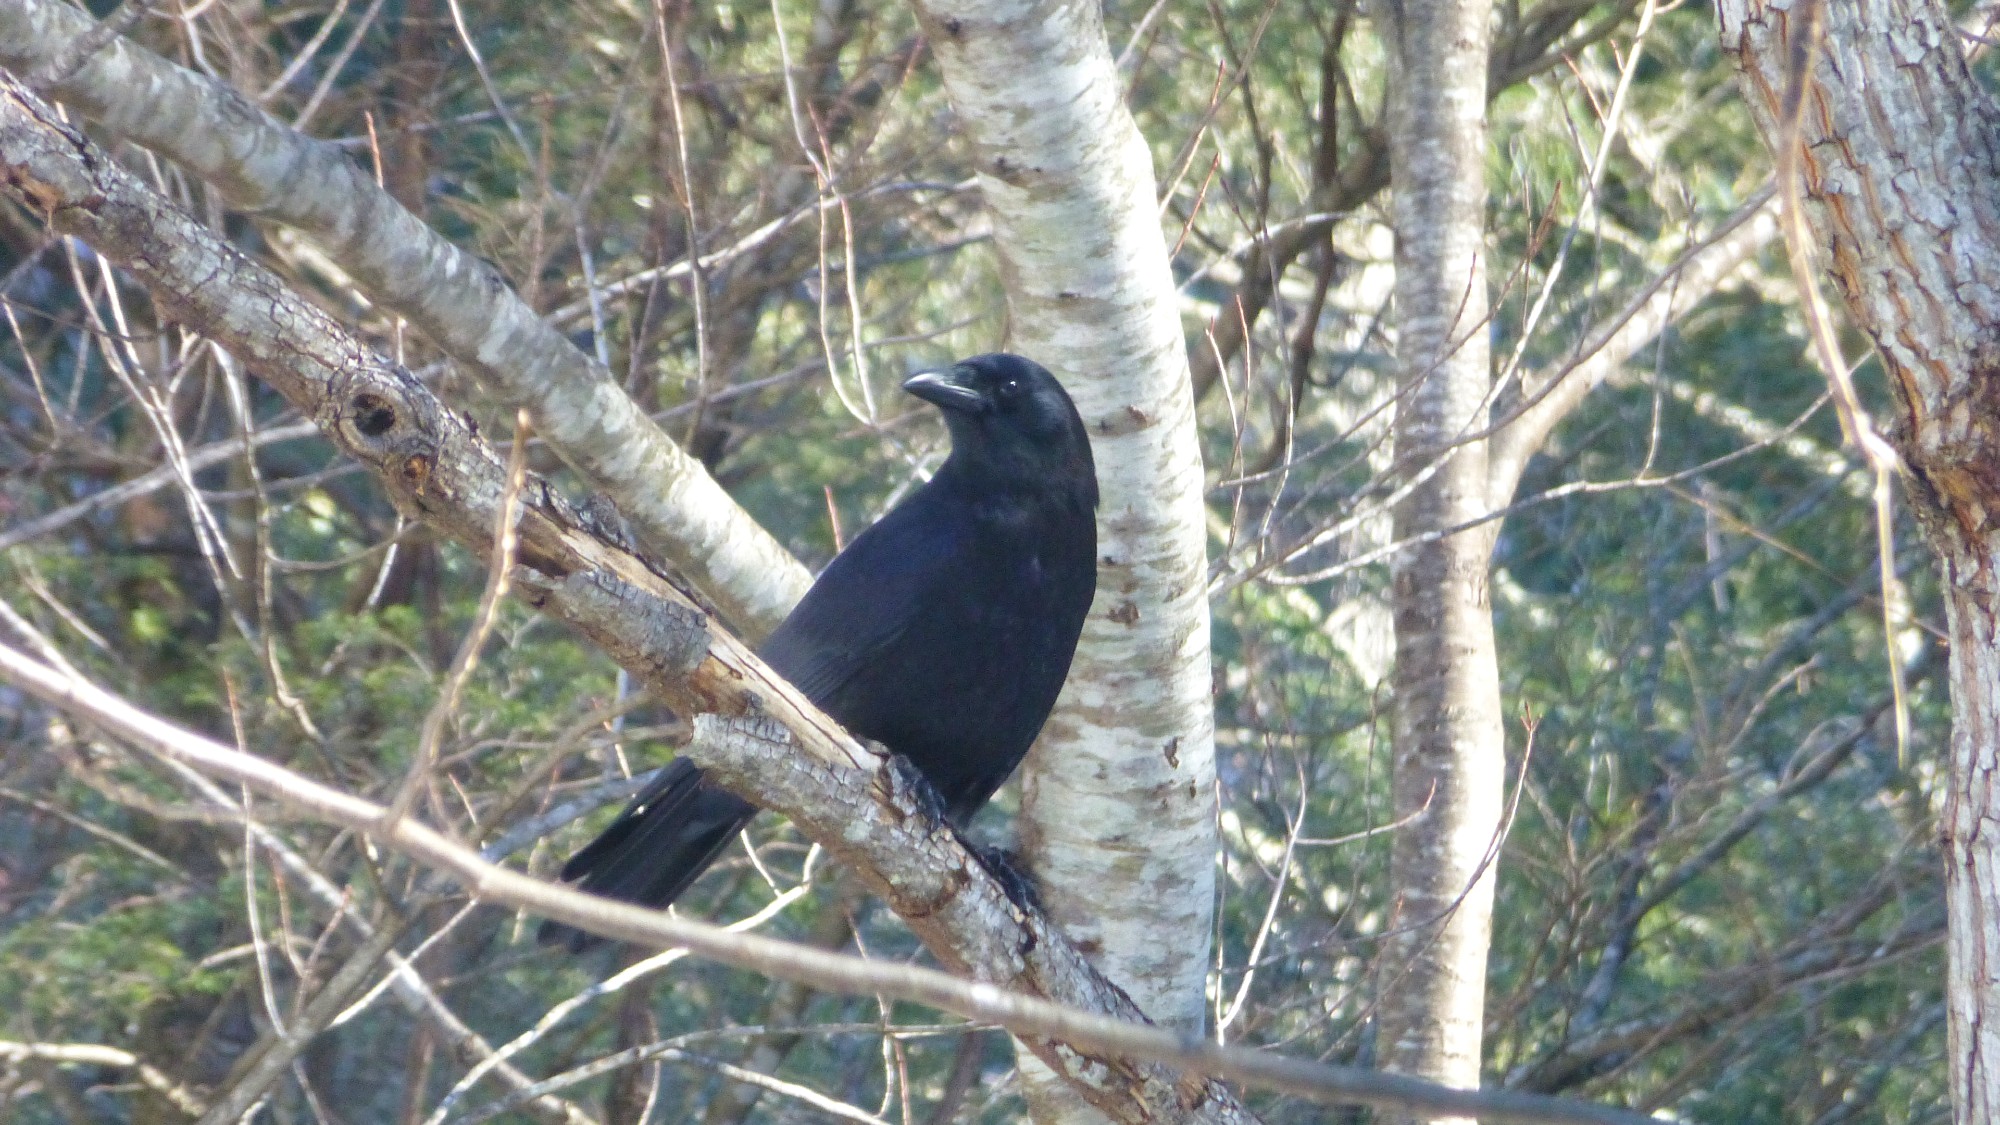 Large dark bird sitting on the limb of a bare branched tree in the woods